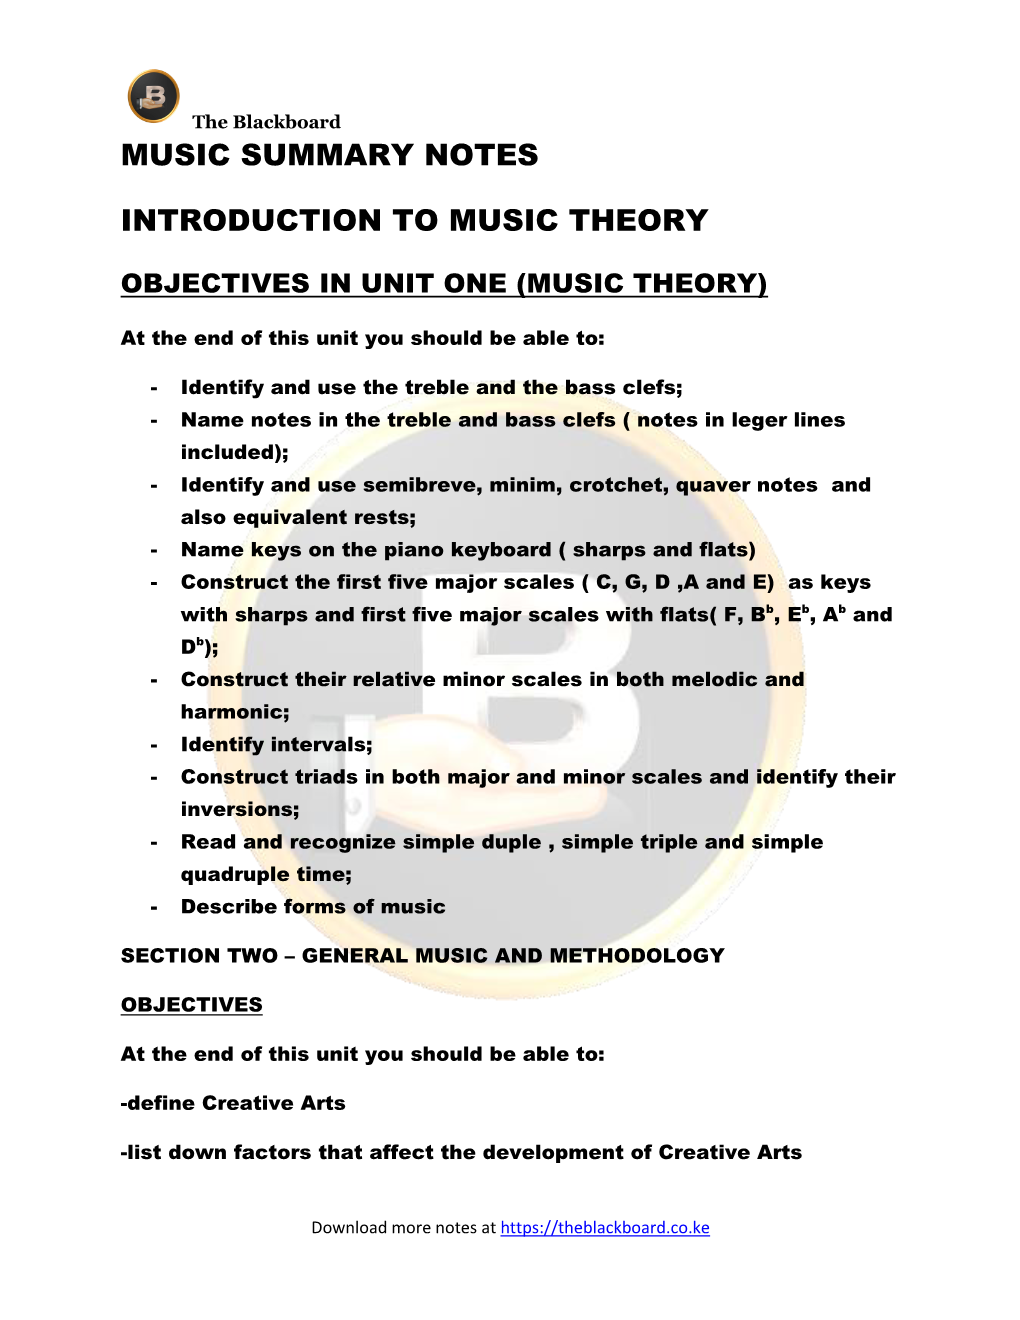 Music Summary Notes Introduction to Music Theory